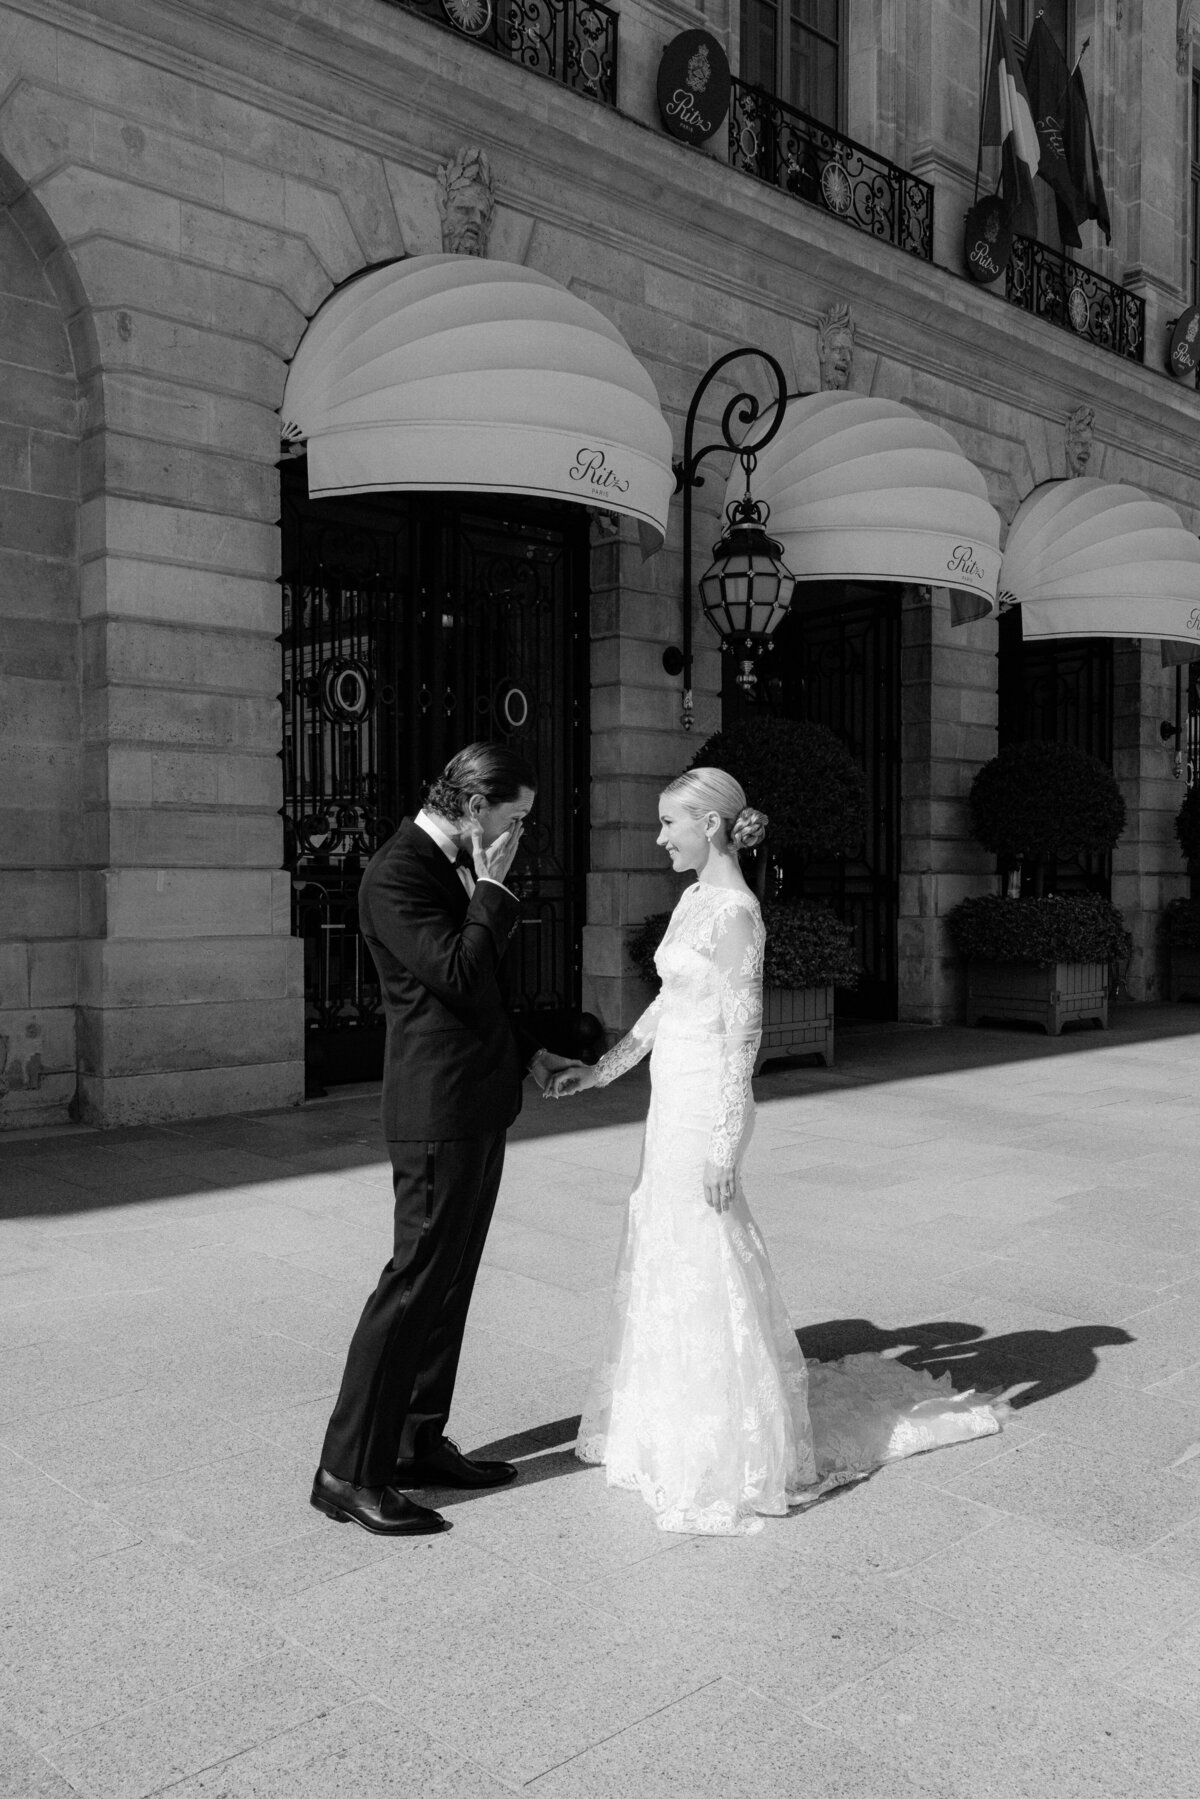 Jennifer Fox Weddings English speaking wedding planning & design agency in France crafting refined and bespoke weddings and celebrations Provence, Paris and destination wd211